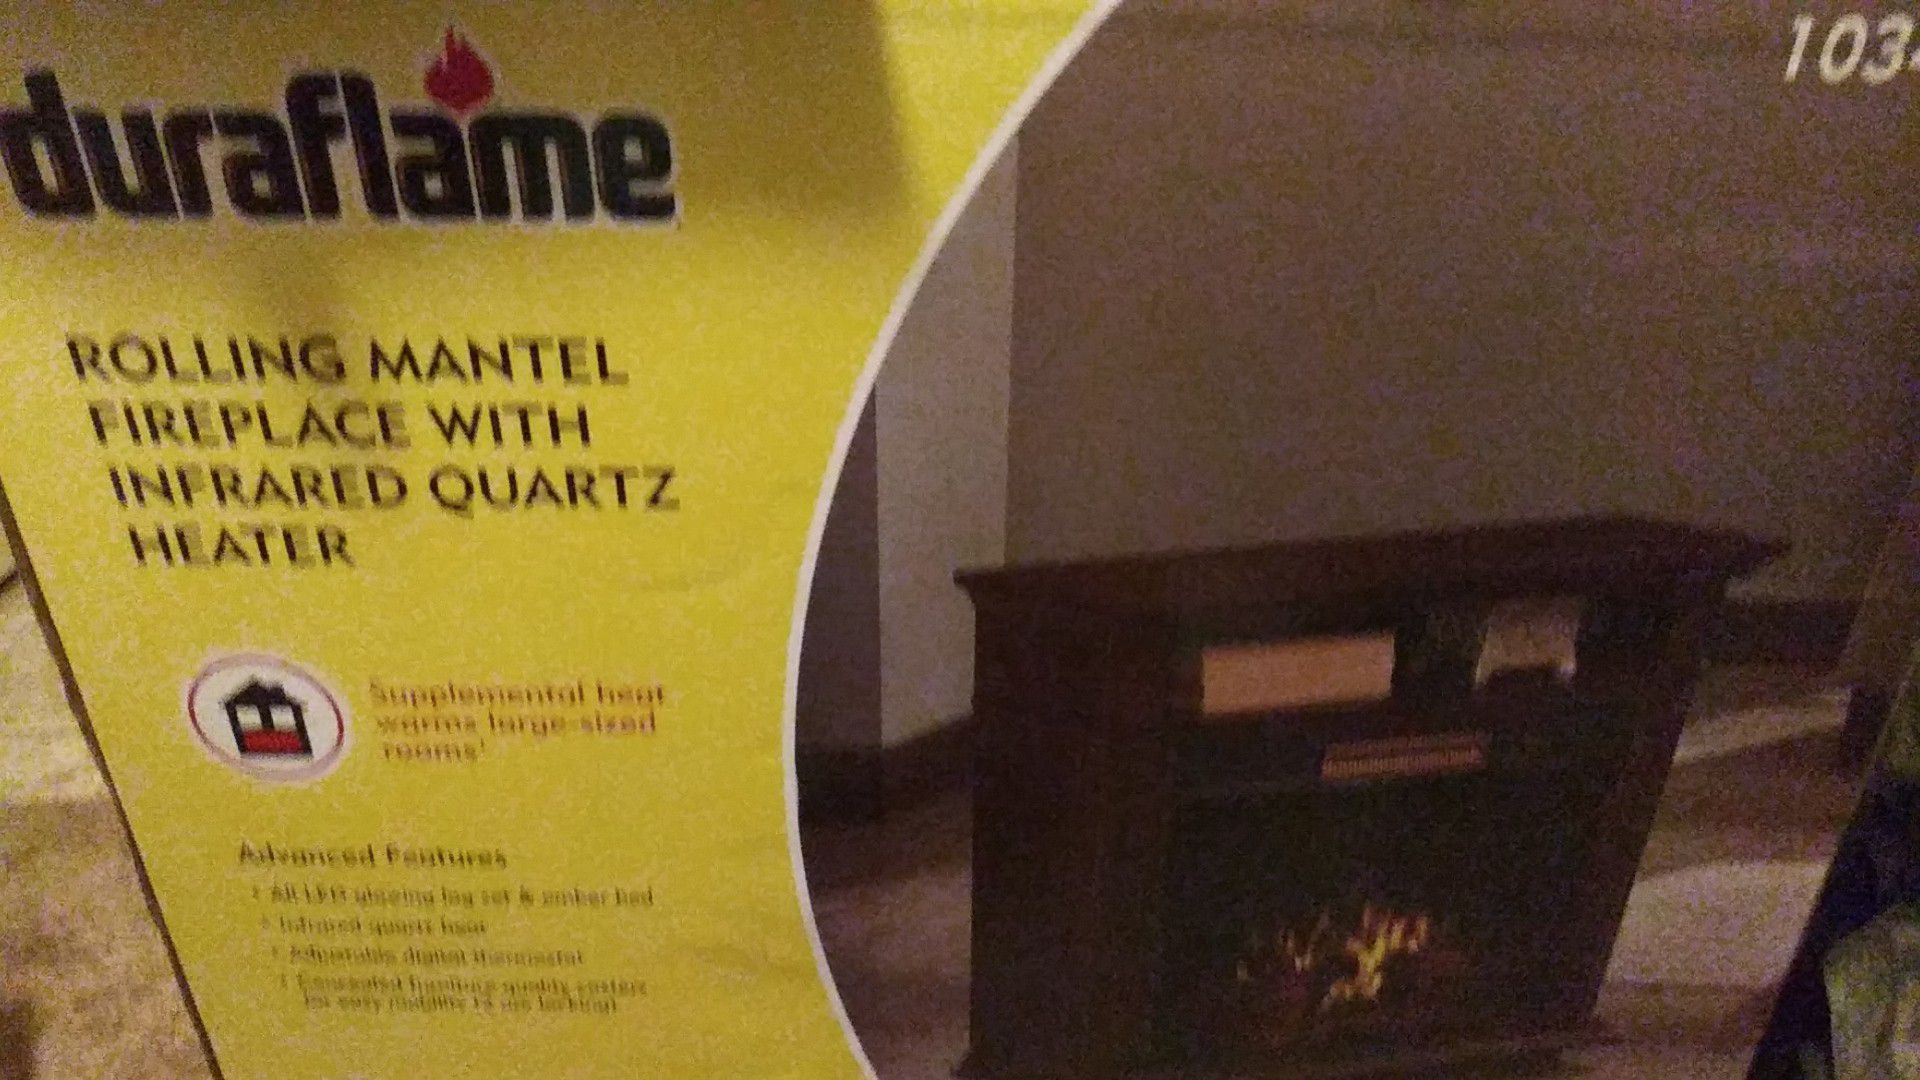 Duraflame rolling mantel fireplace with infrared quartz heater